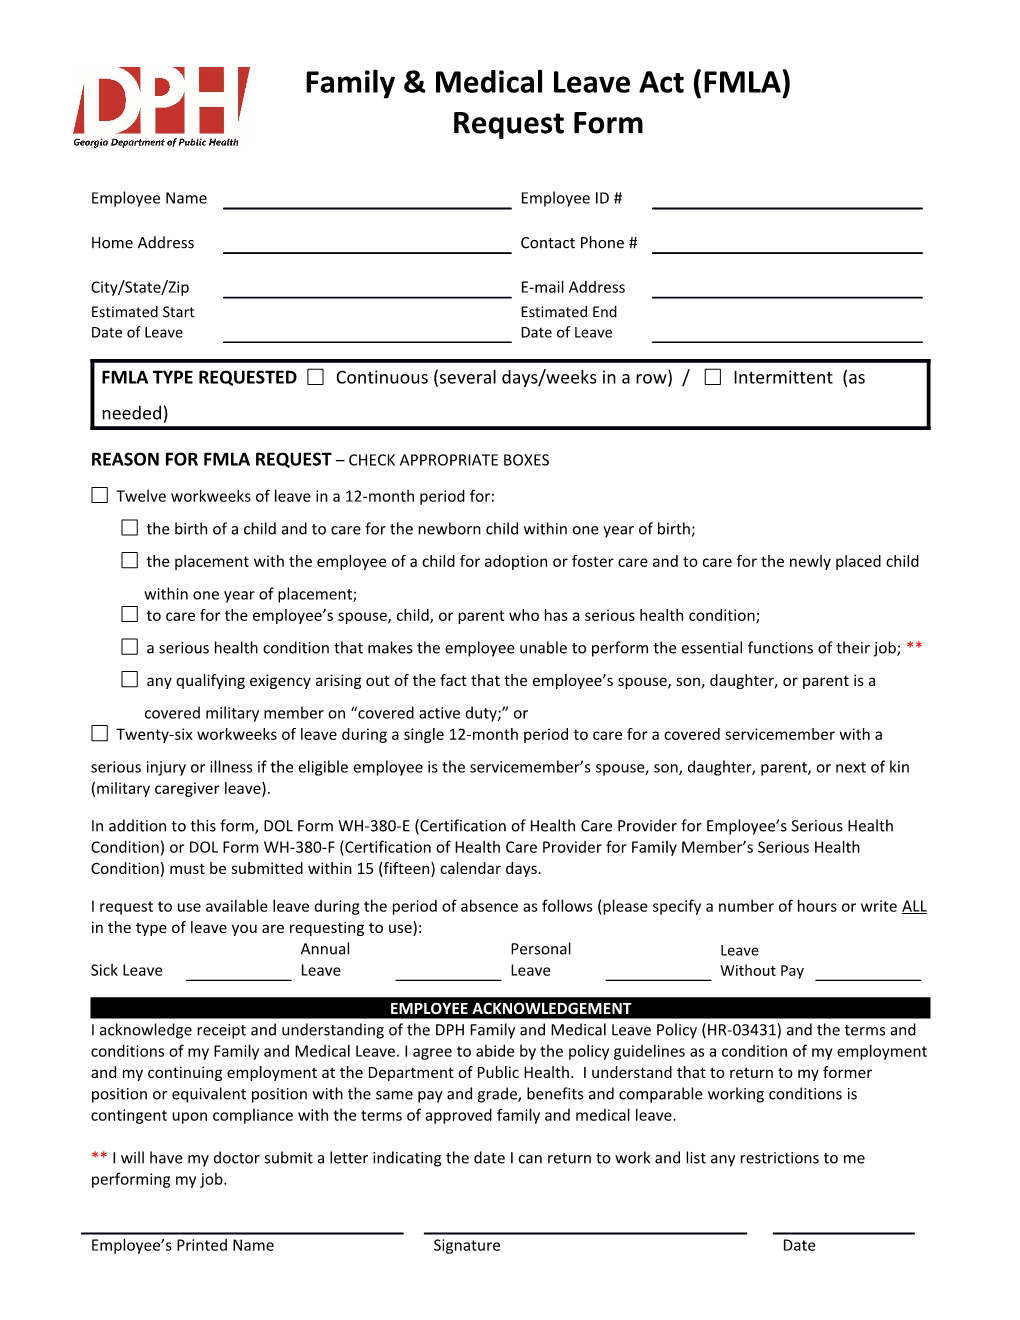 This Page to Be Filled out Only for Continuous Leave Requests